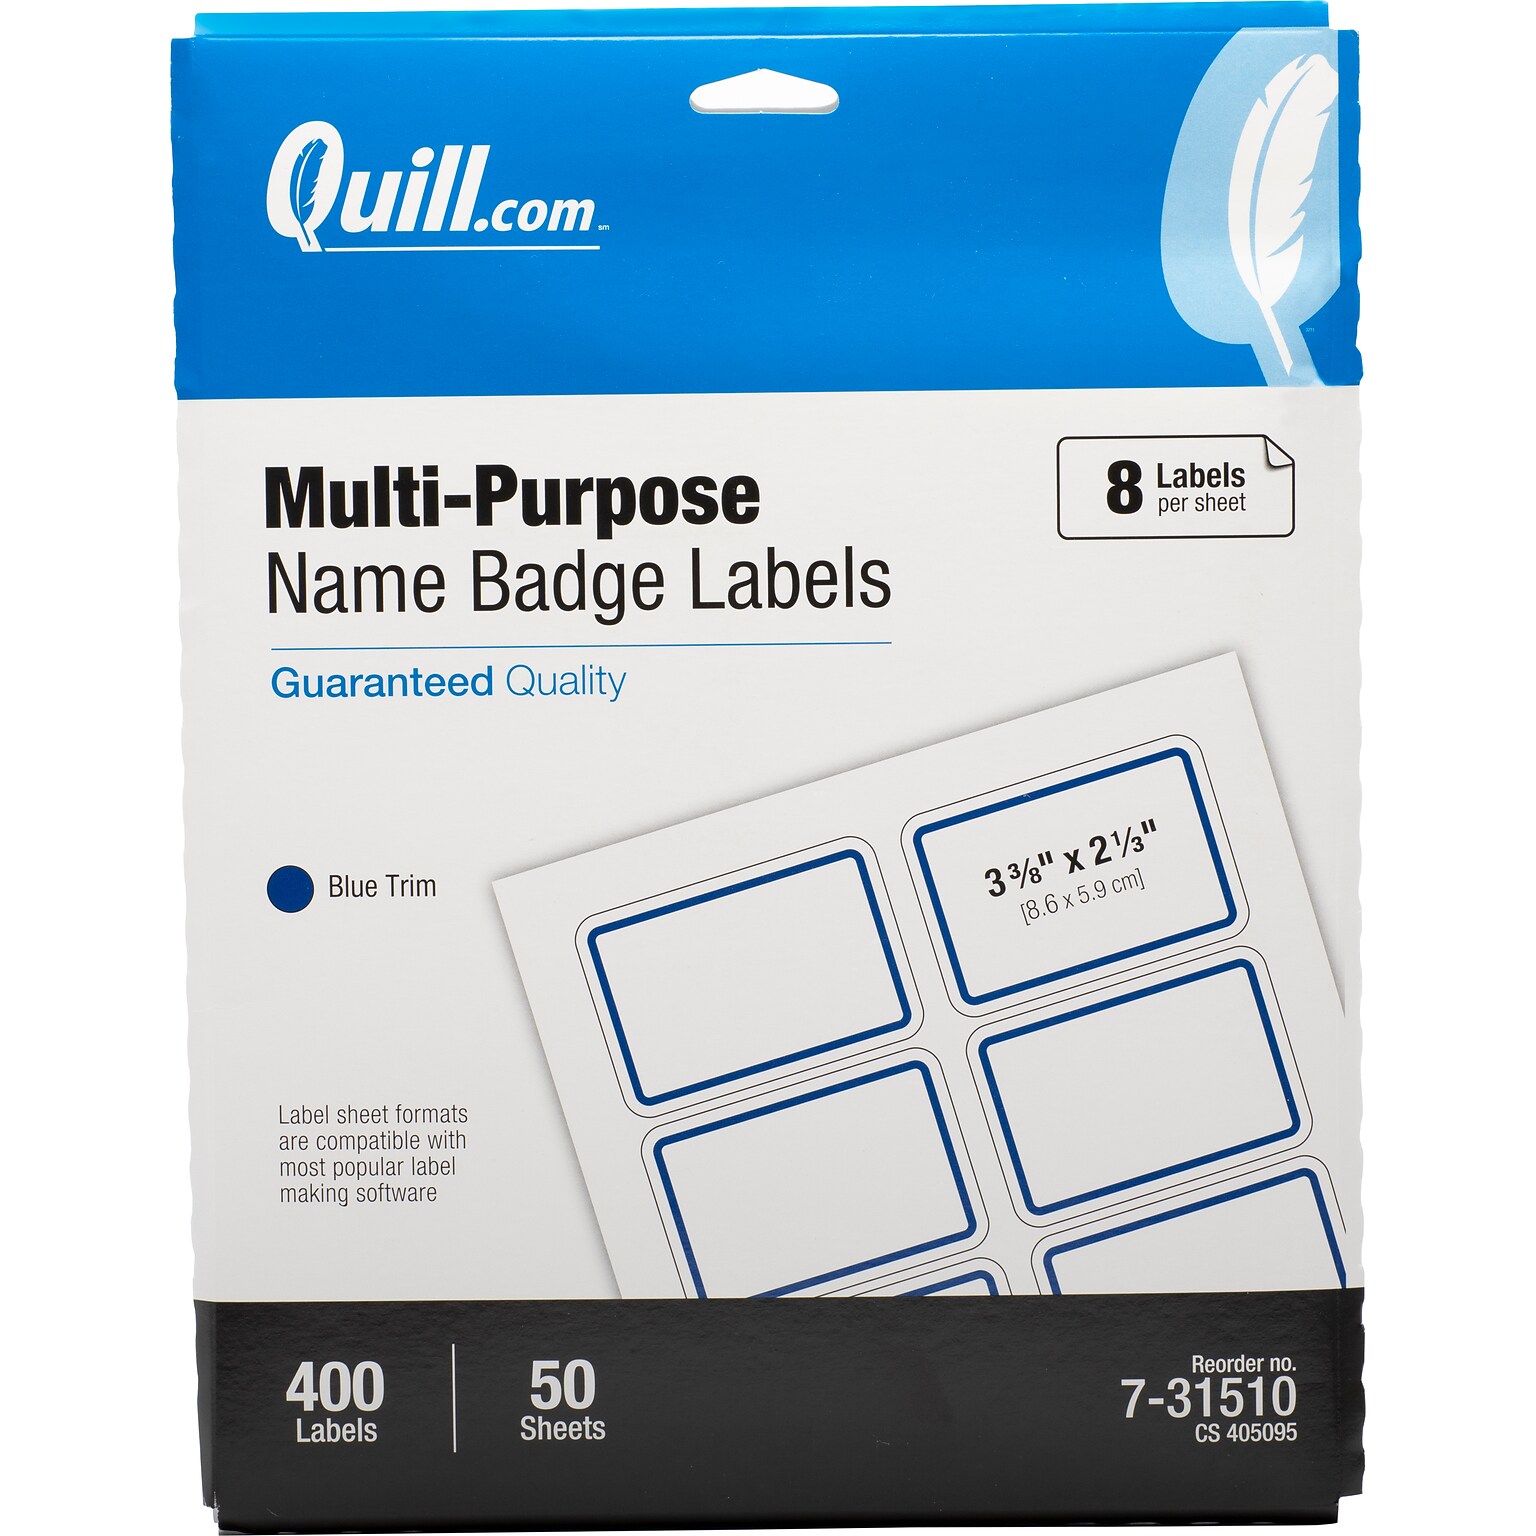 Quill Brand Self Adhesive Name Badges, 2-1/3 x 3-3/8, White/Blue, 8 Labels/Sheet, 50 Sheets/Pack (Compare to Avery 5895)